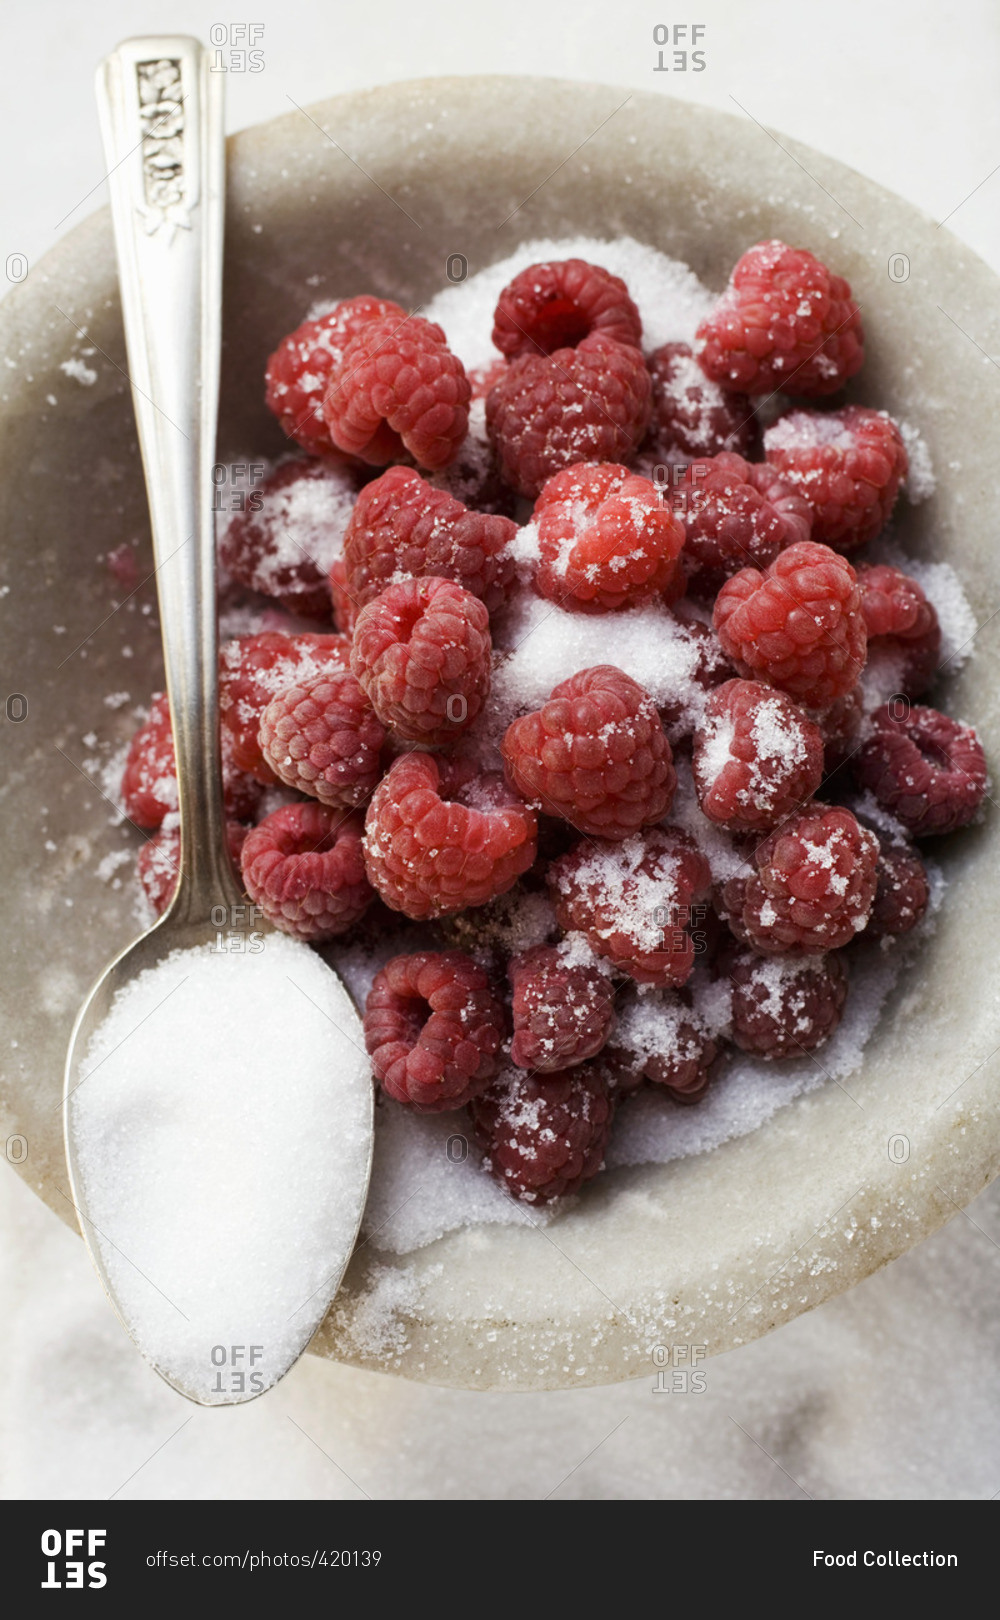 Sugared raspberries in a bowl with a spoonful of sugar